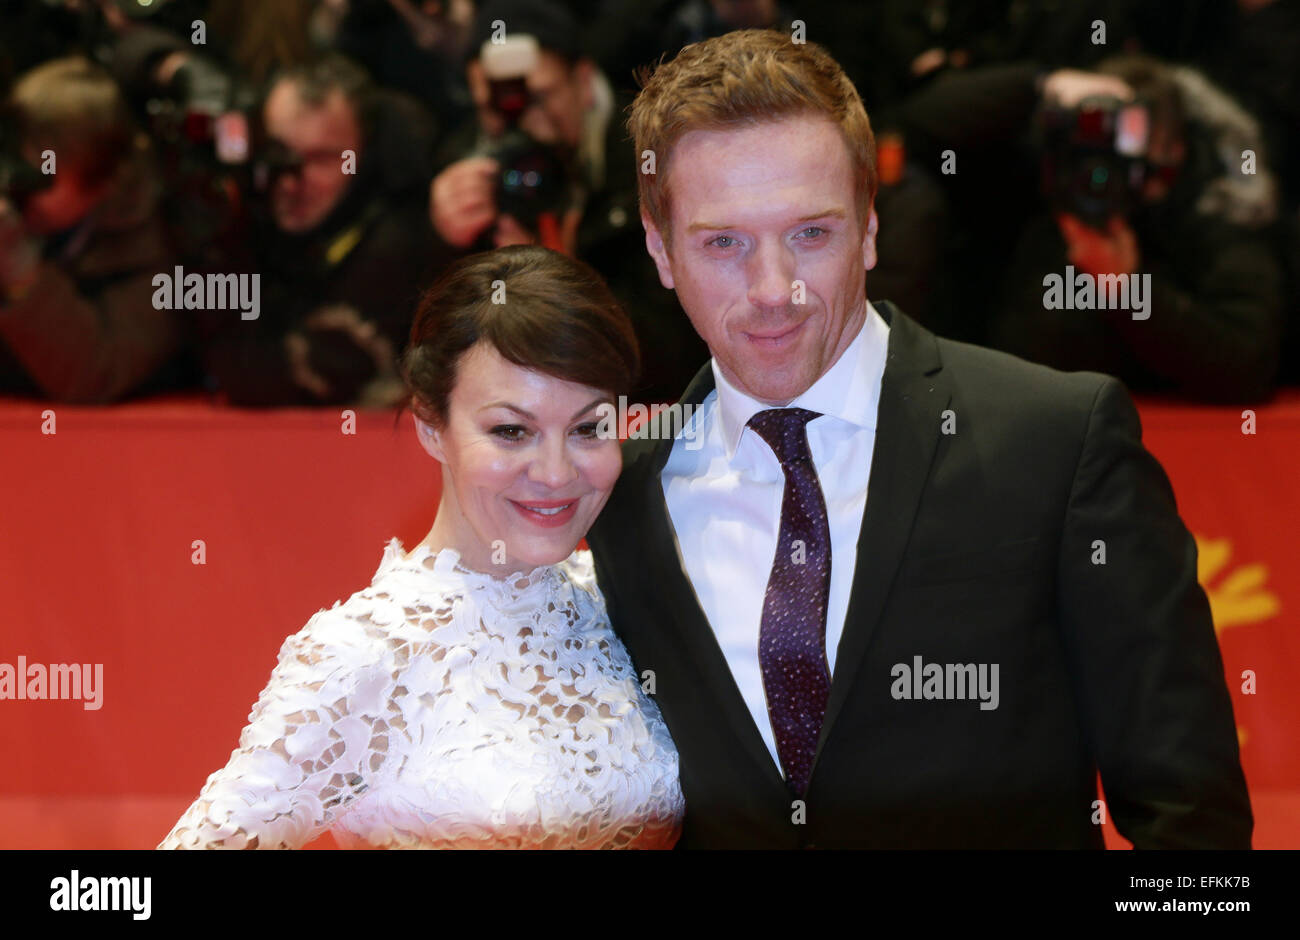 Berlin, Germany. 06th Feb, 2015. British actor Damian Lewis and his wife Helen McCrory arrive for the screening of 'Queen of the Desert' during the 65th annual Berlin Film Festival, in Berlin, Germany, 06 February 2015. The movie is presented in the Official Competition of the Berlinale, which runs from 05 to 15 February 2015. PHOTO: MICHAEL KAPPELER/dpa/Alamy Live News Stock Photo